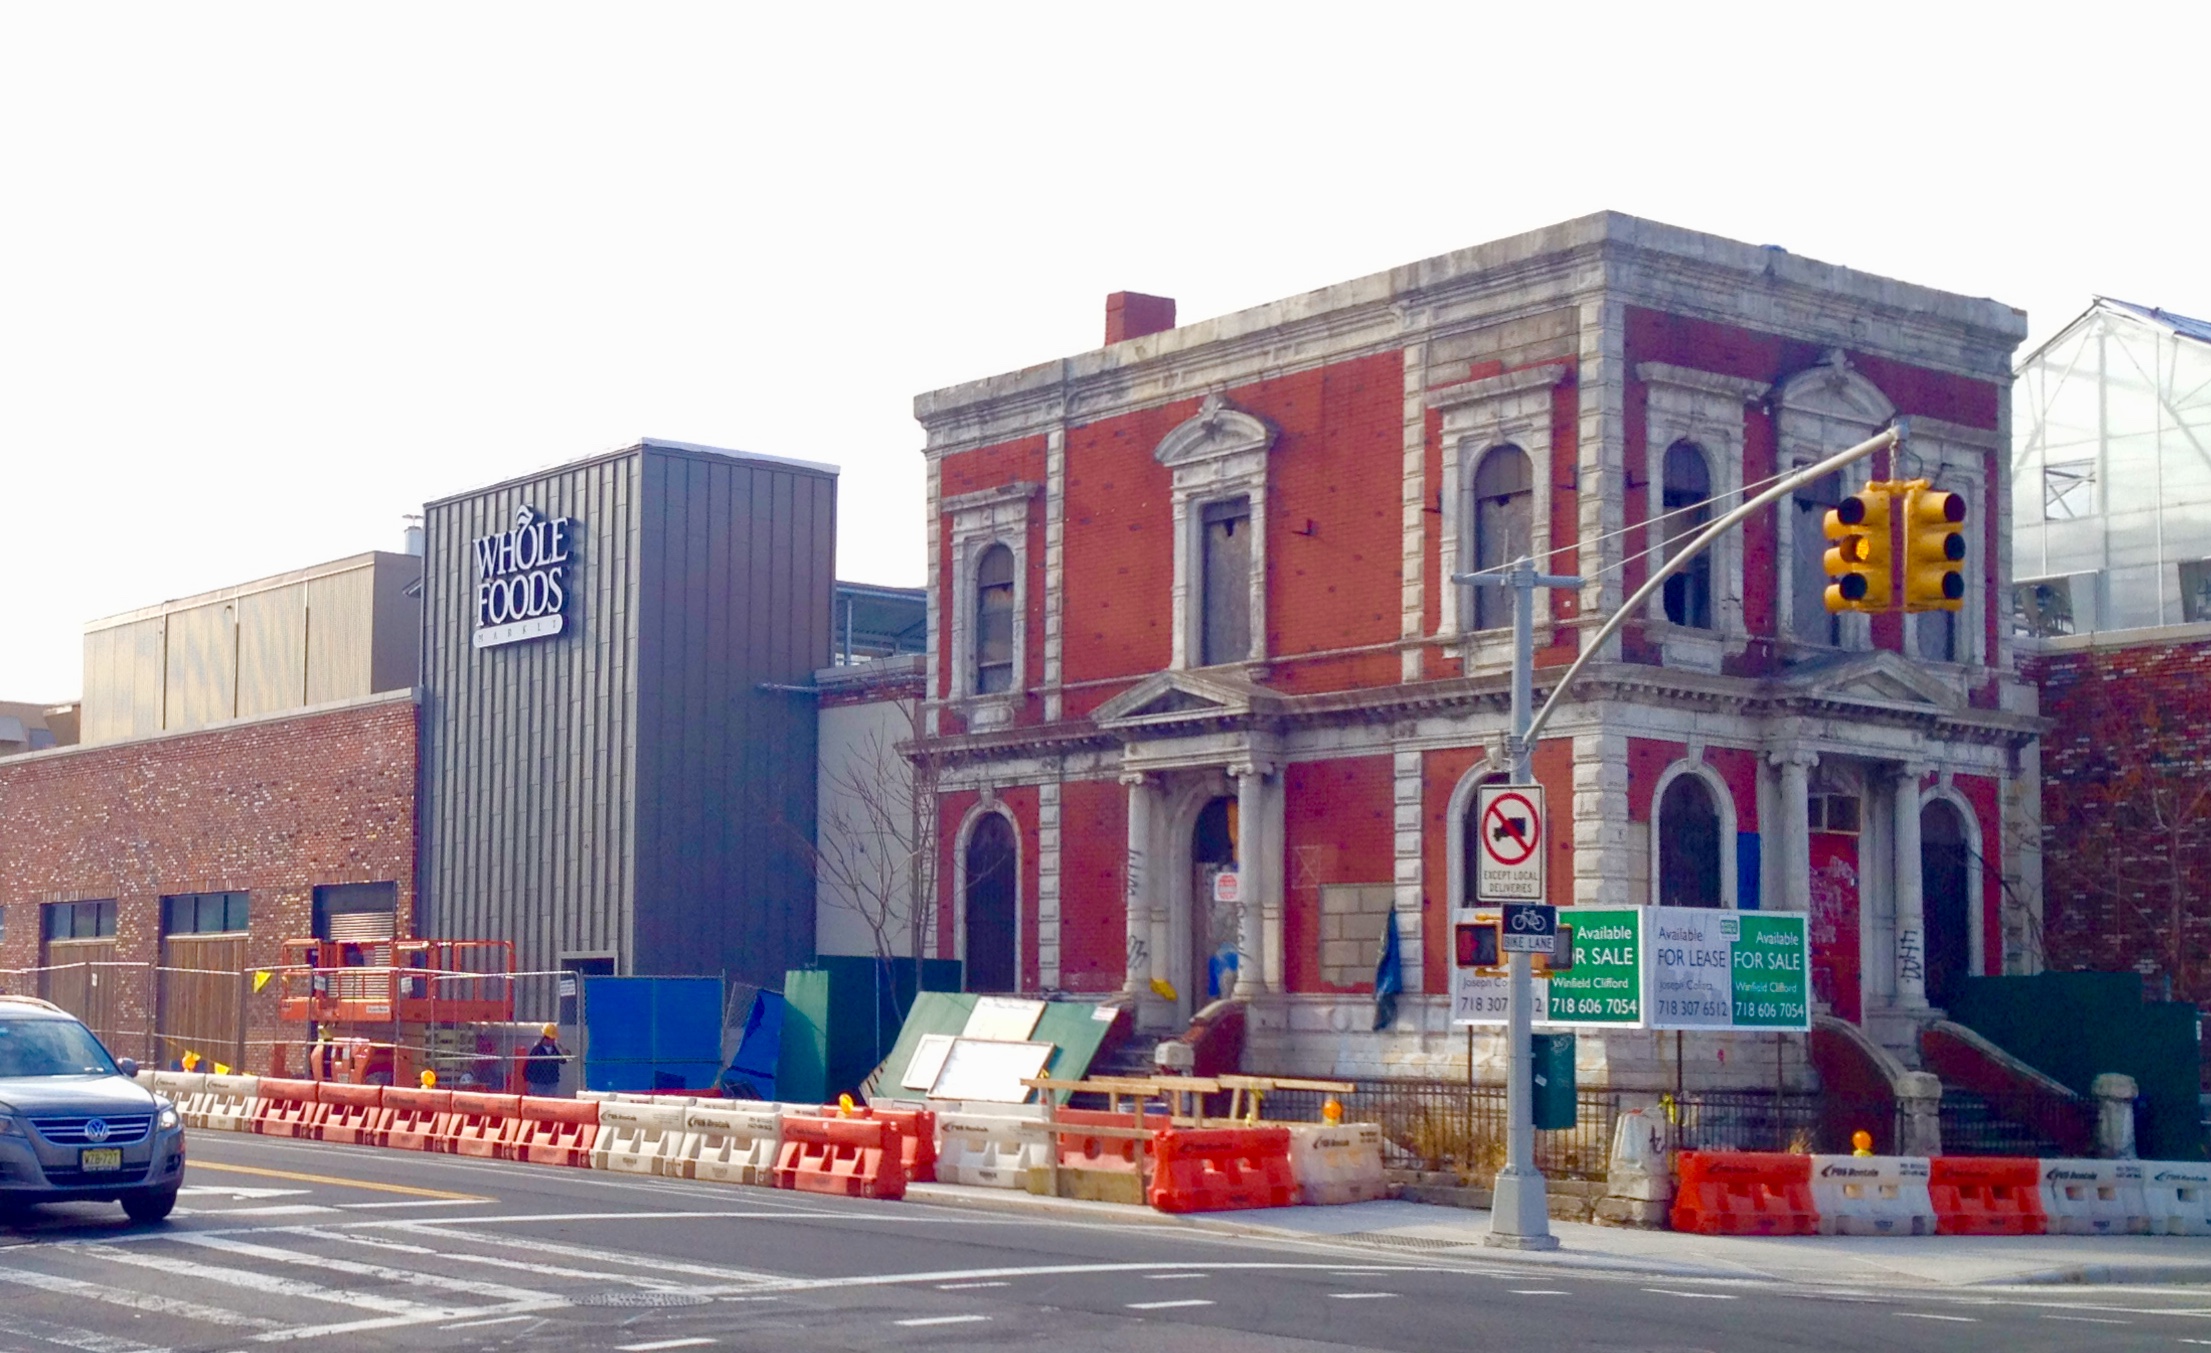 Here’s a December 2013 photo showing the Coignet Building (at right) before it was repaired. Eagle file photo by Lore Croghan